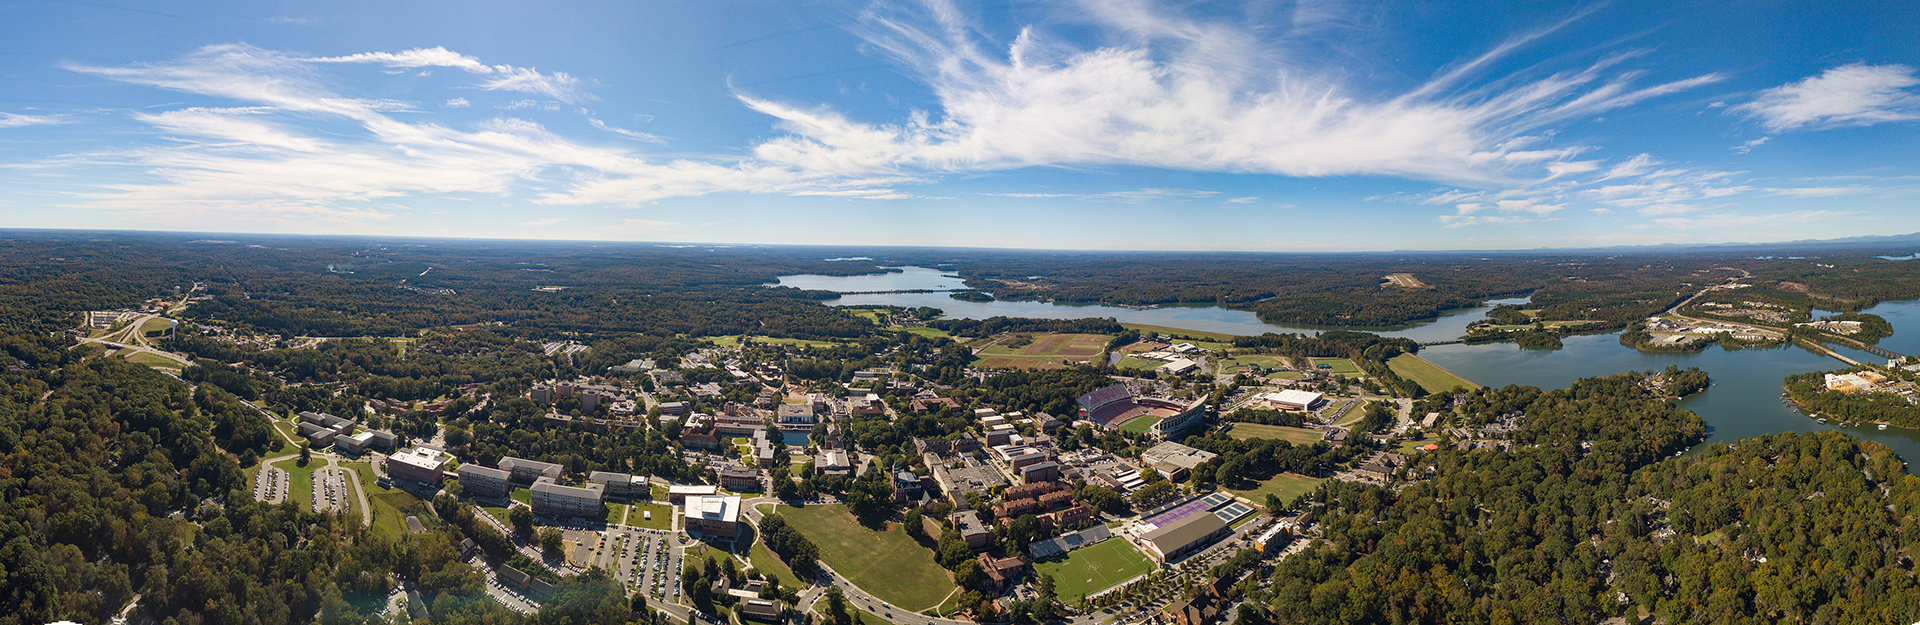 Aerial view of Clemson University campus and surrounding area.